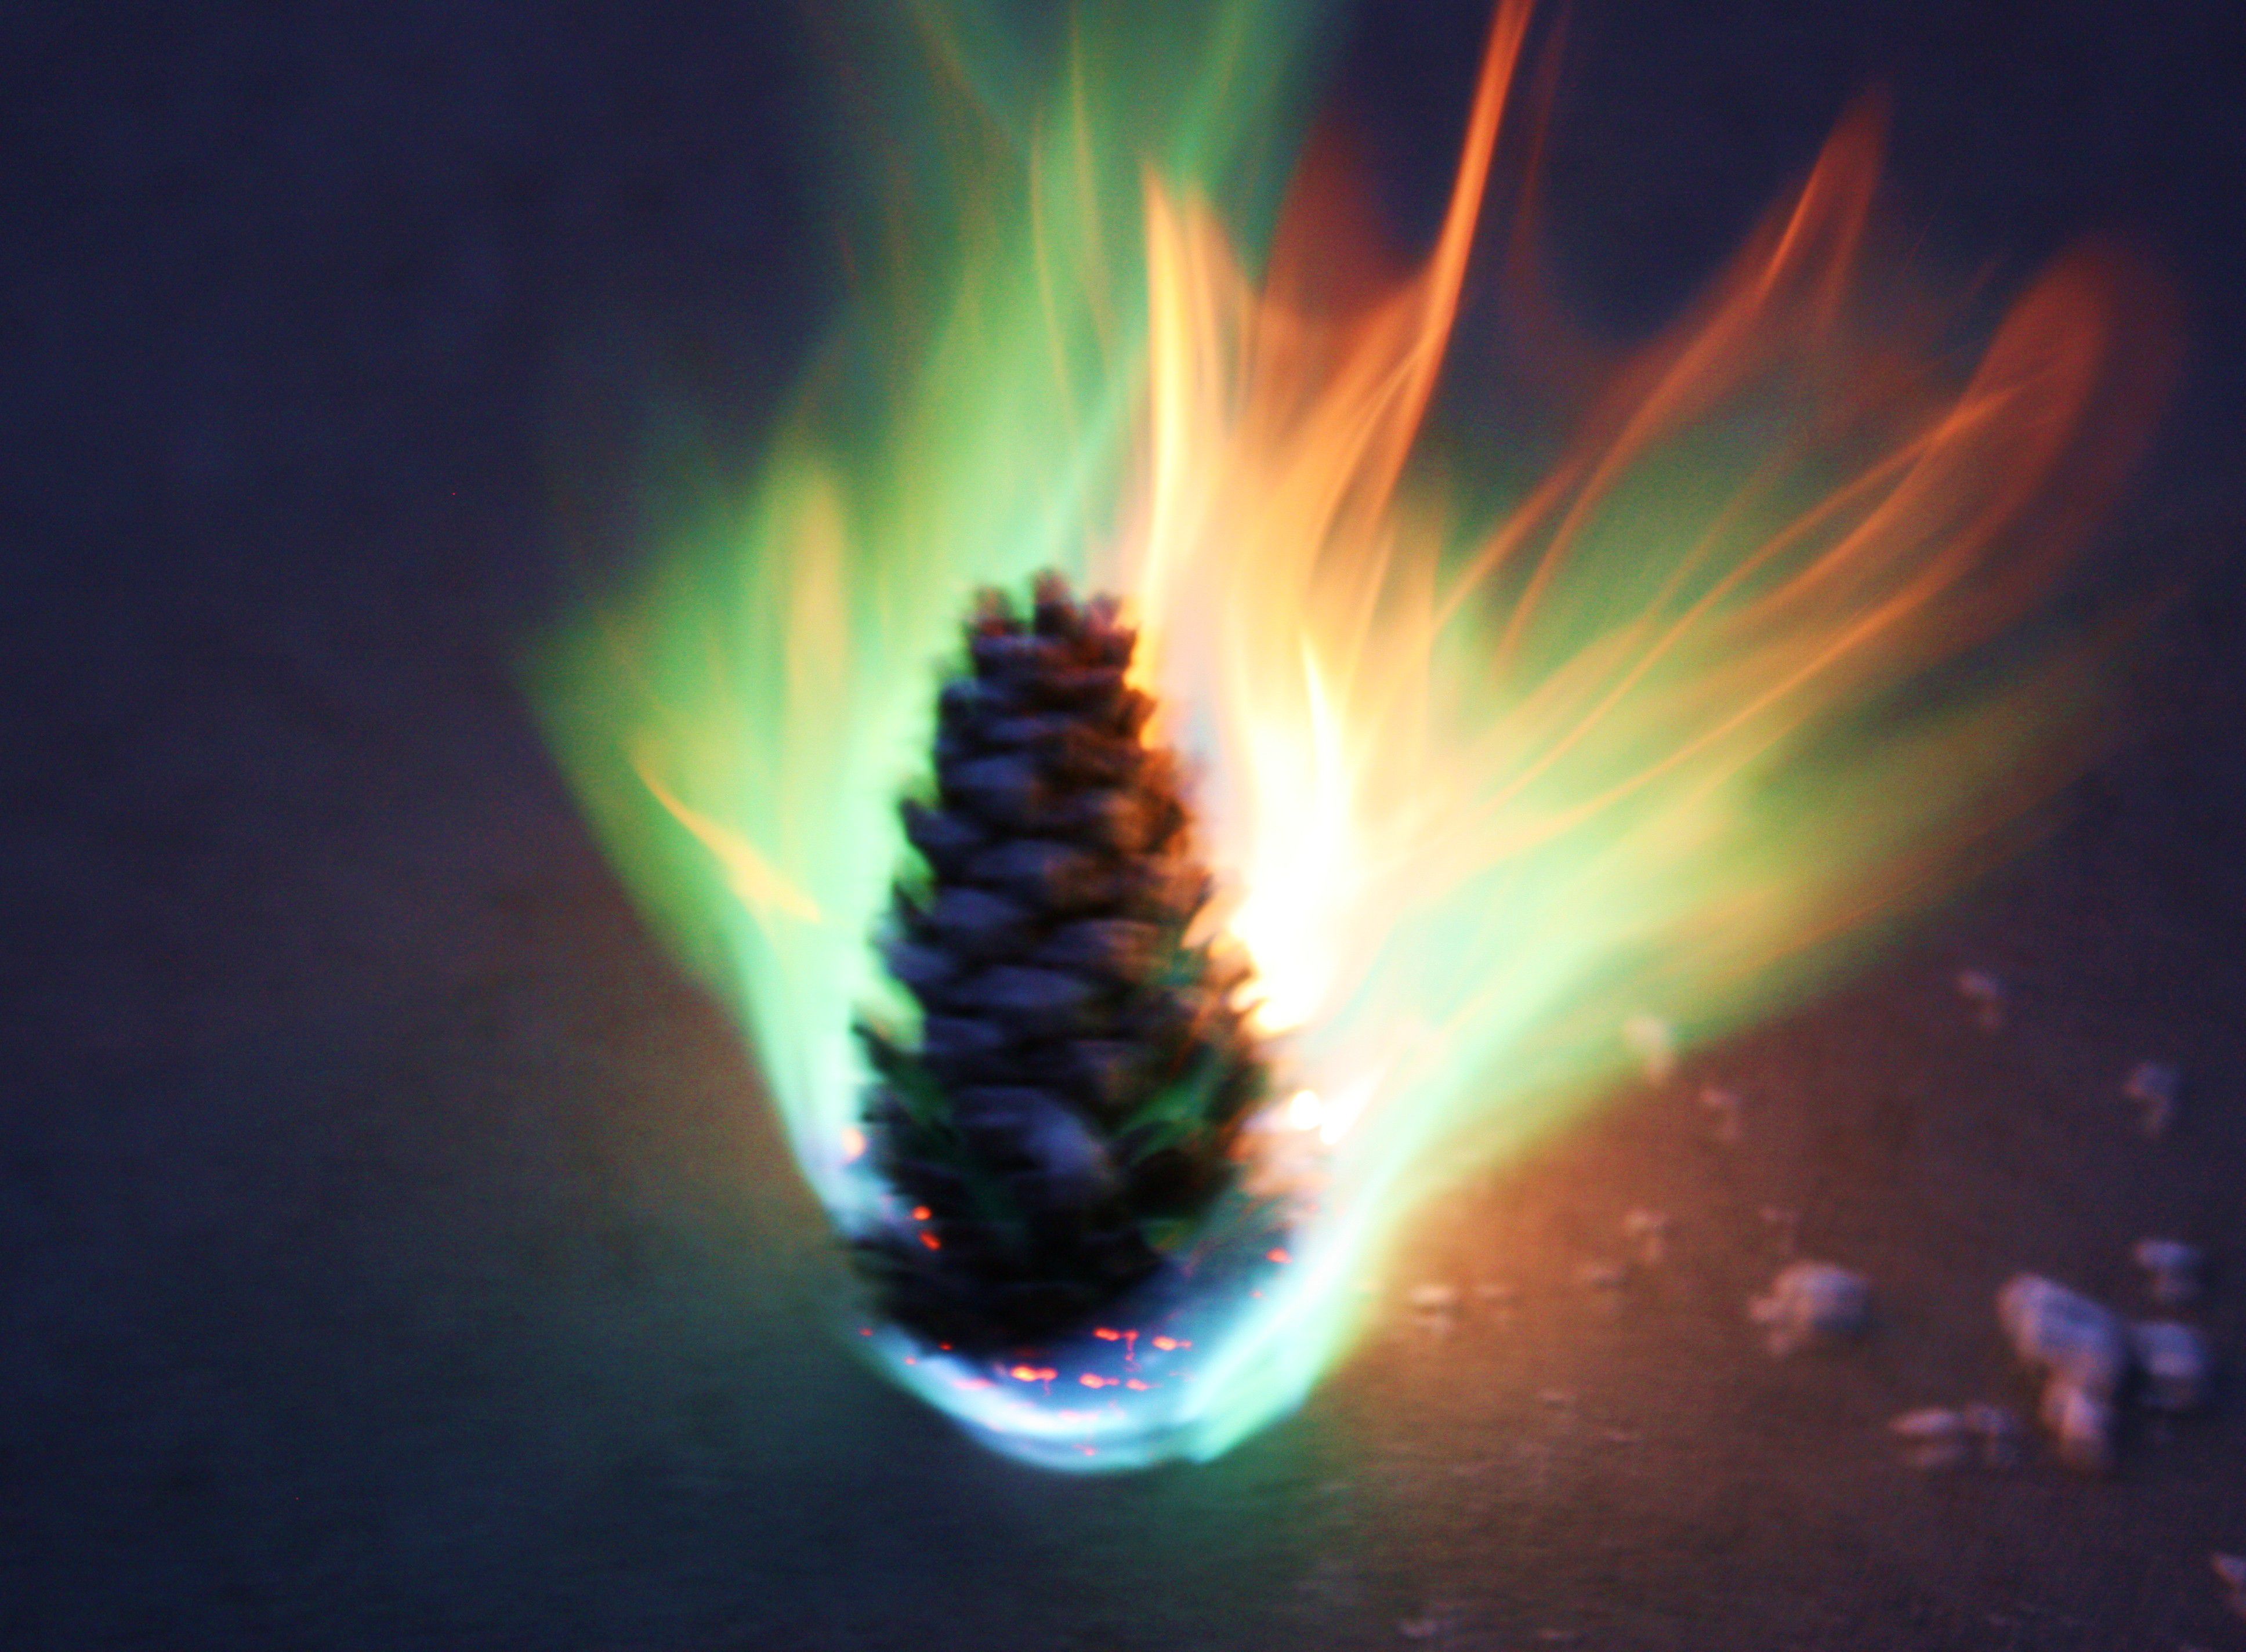 How to Make Colored Fire Pinecones